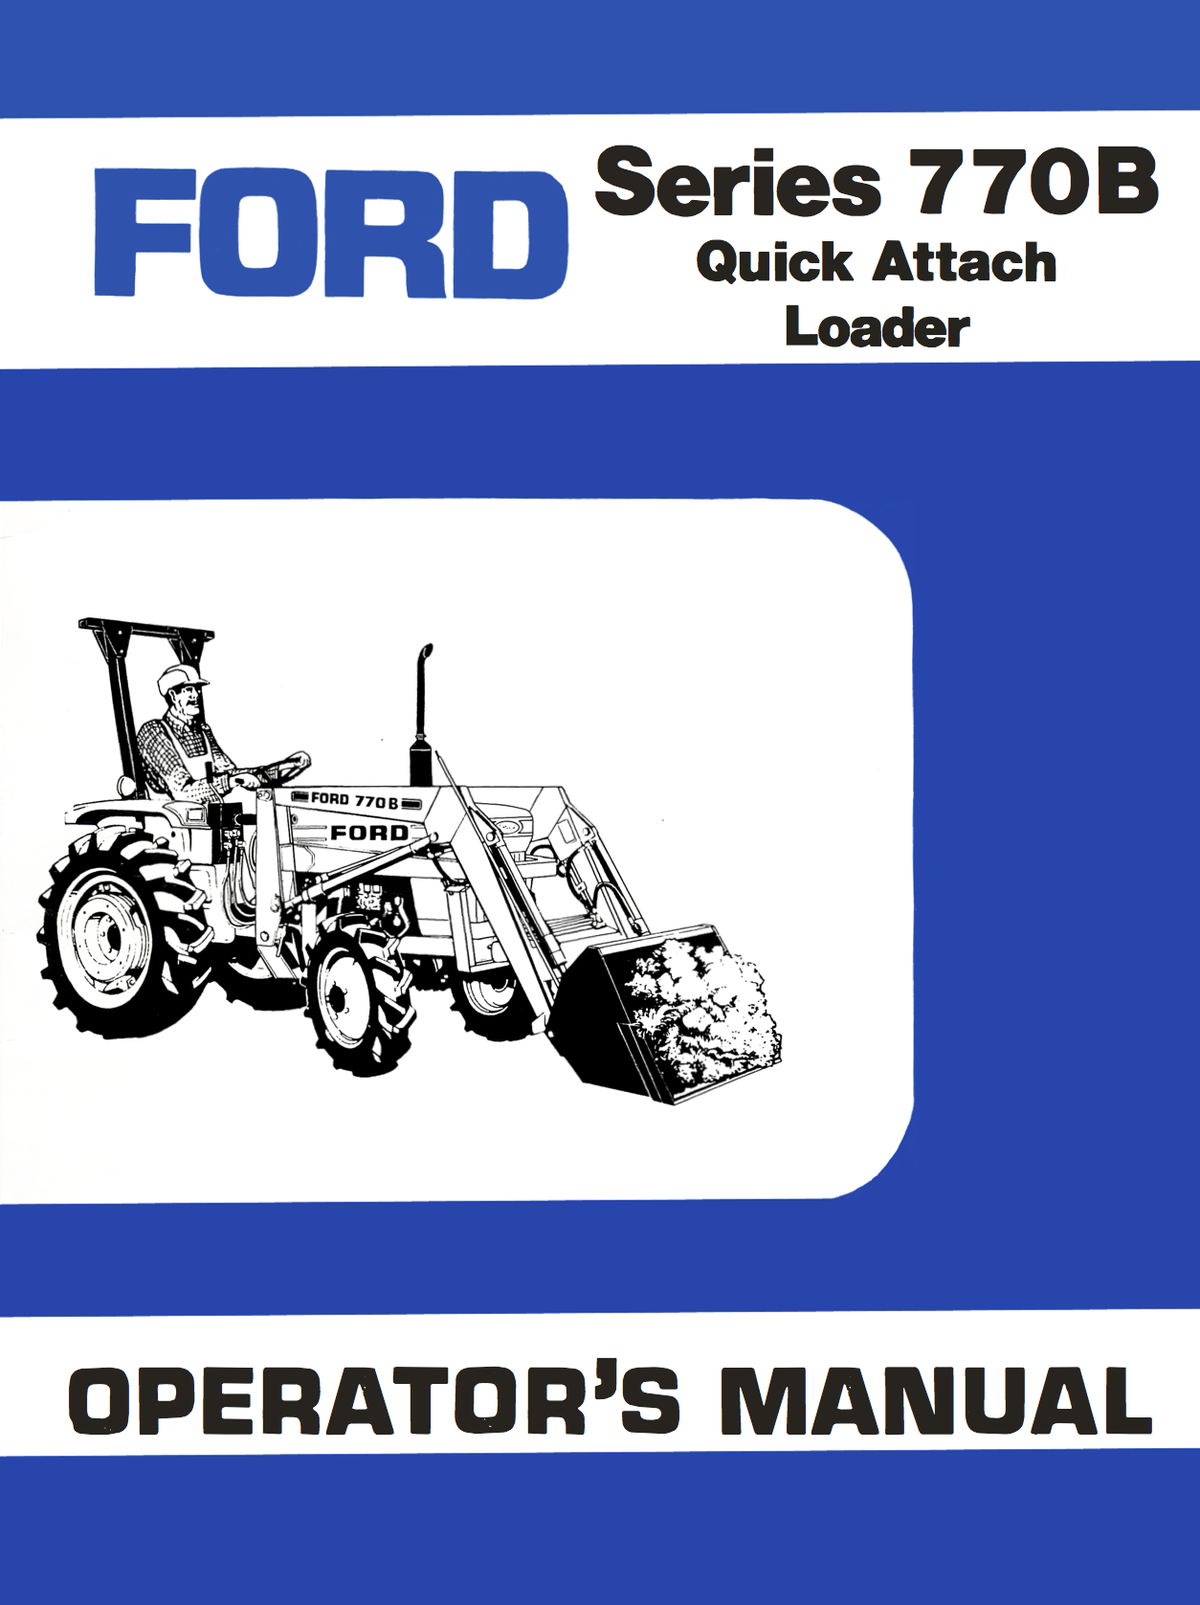 Ford Series 770B Quick Attach Loader - Manual